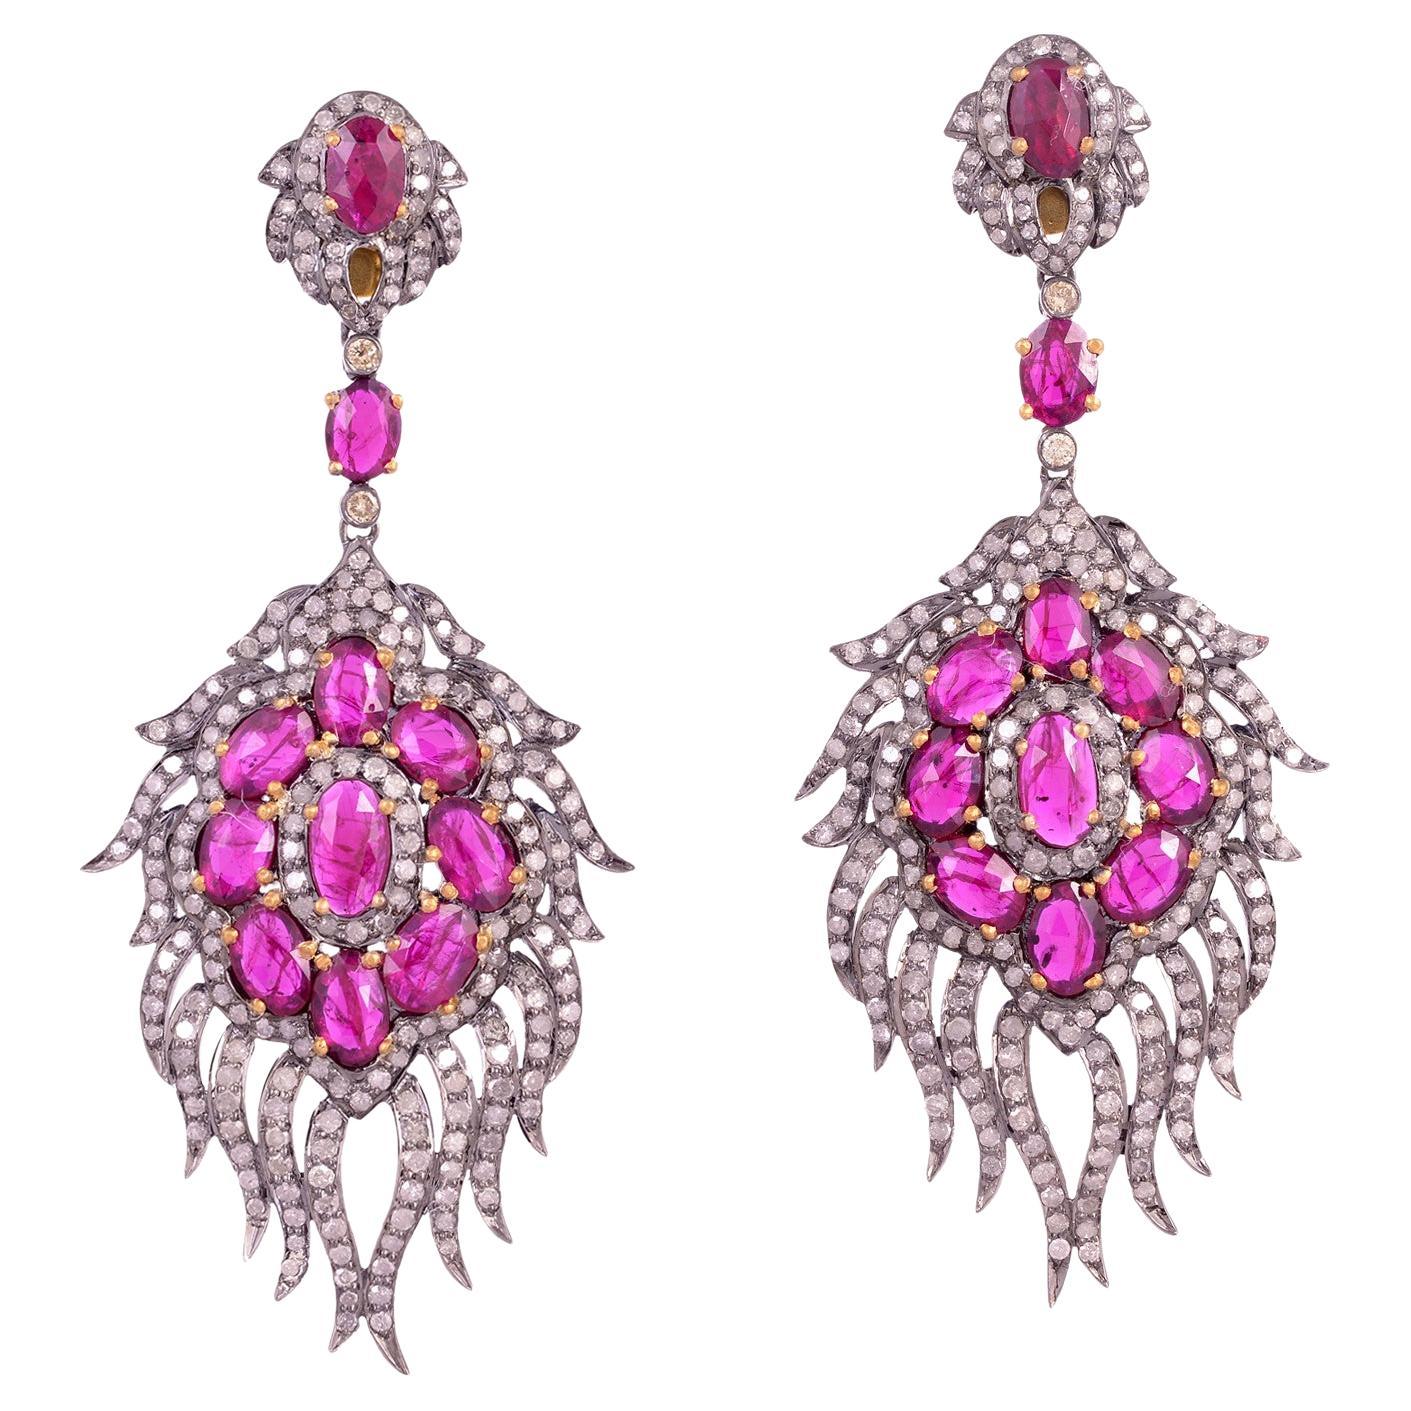 Rose Cut Ruby Dangle Earrings with Pave Diamonds Made in 18k Gold & Silver